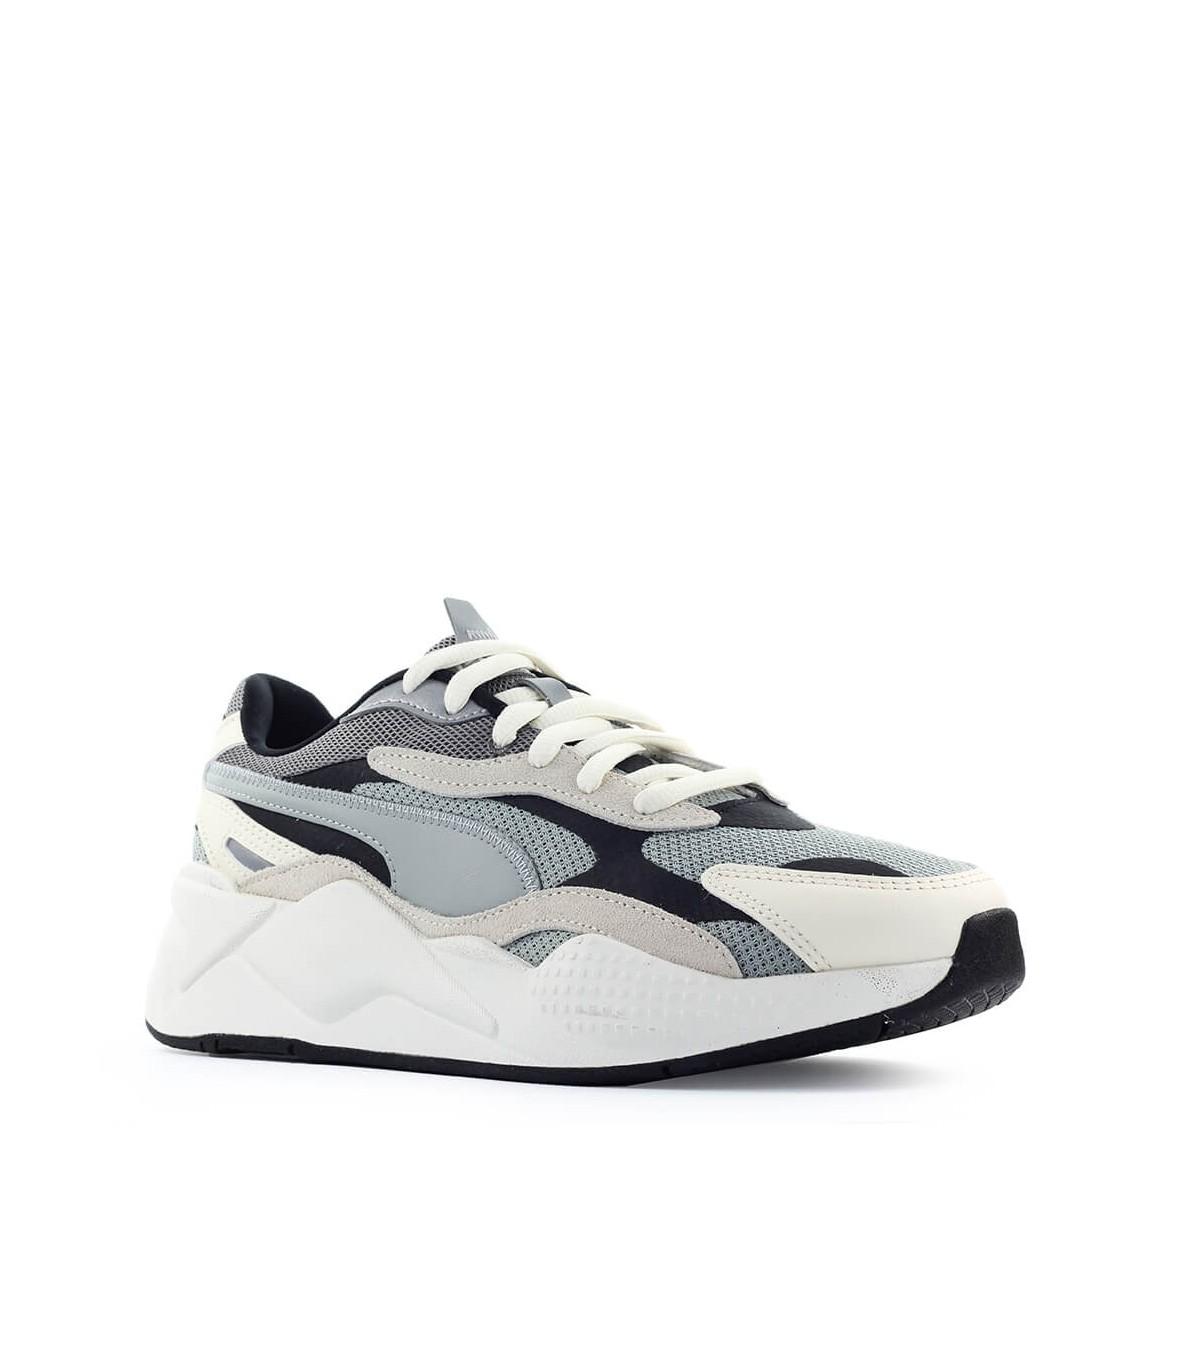 PUMA Leather Rs-x3 Puzzle Limestone Whisper White Sneaker for Men - Lyst